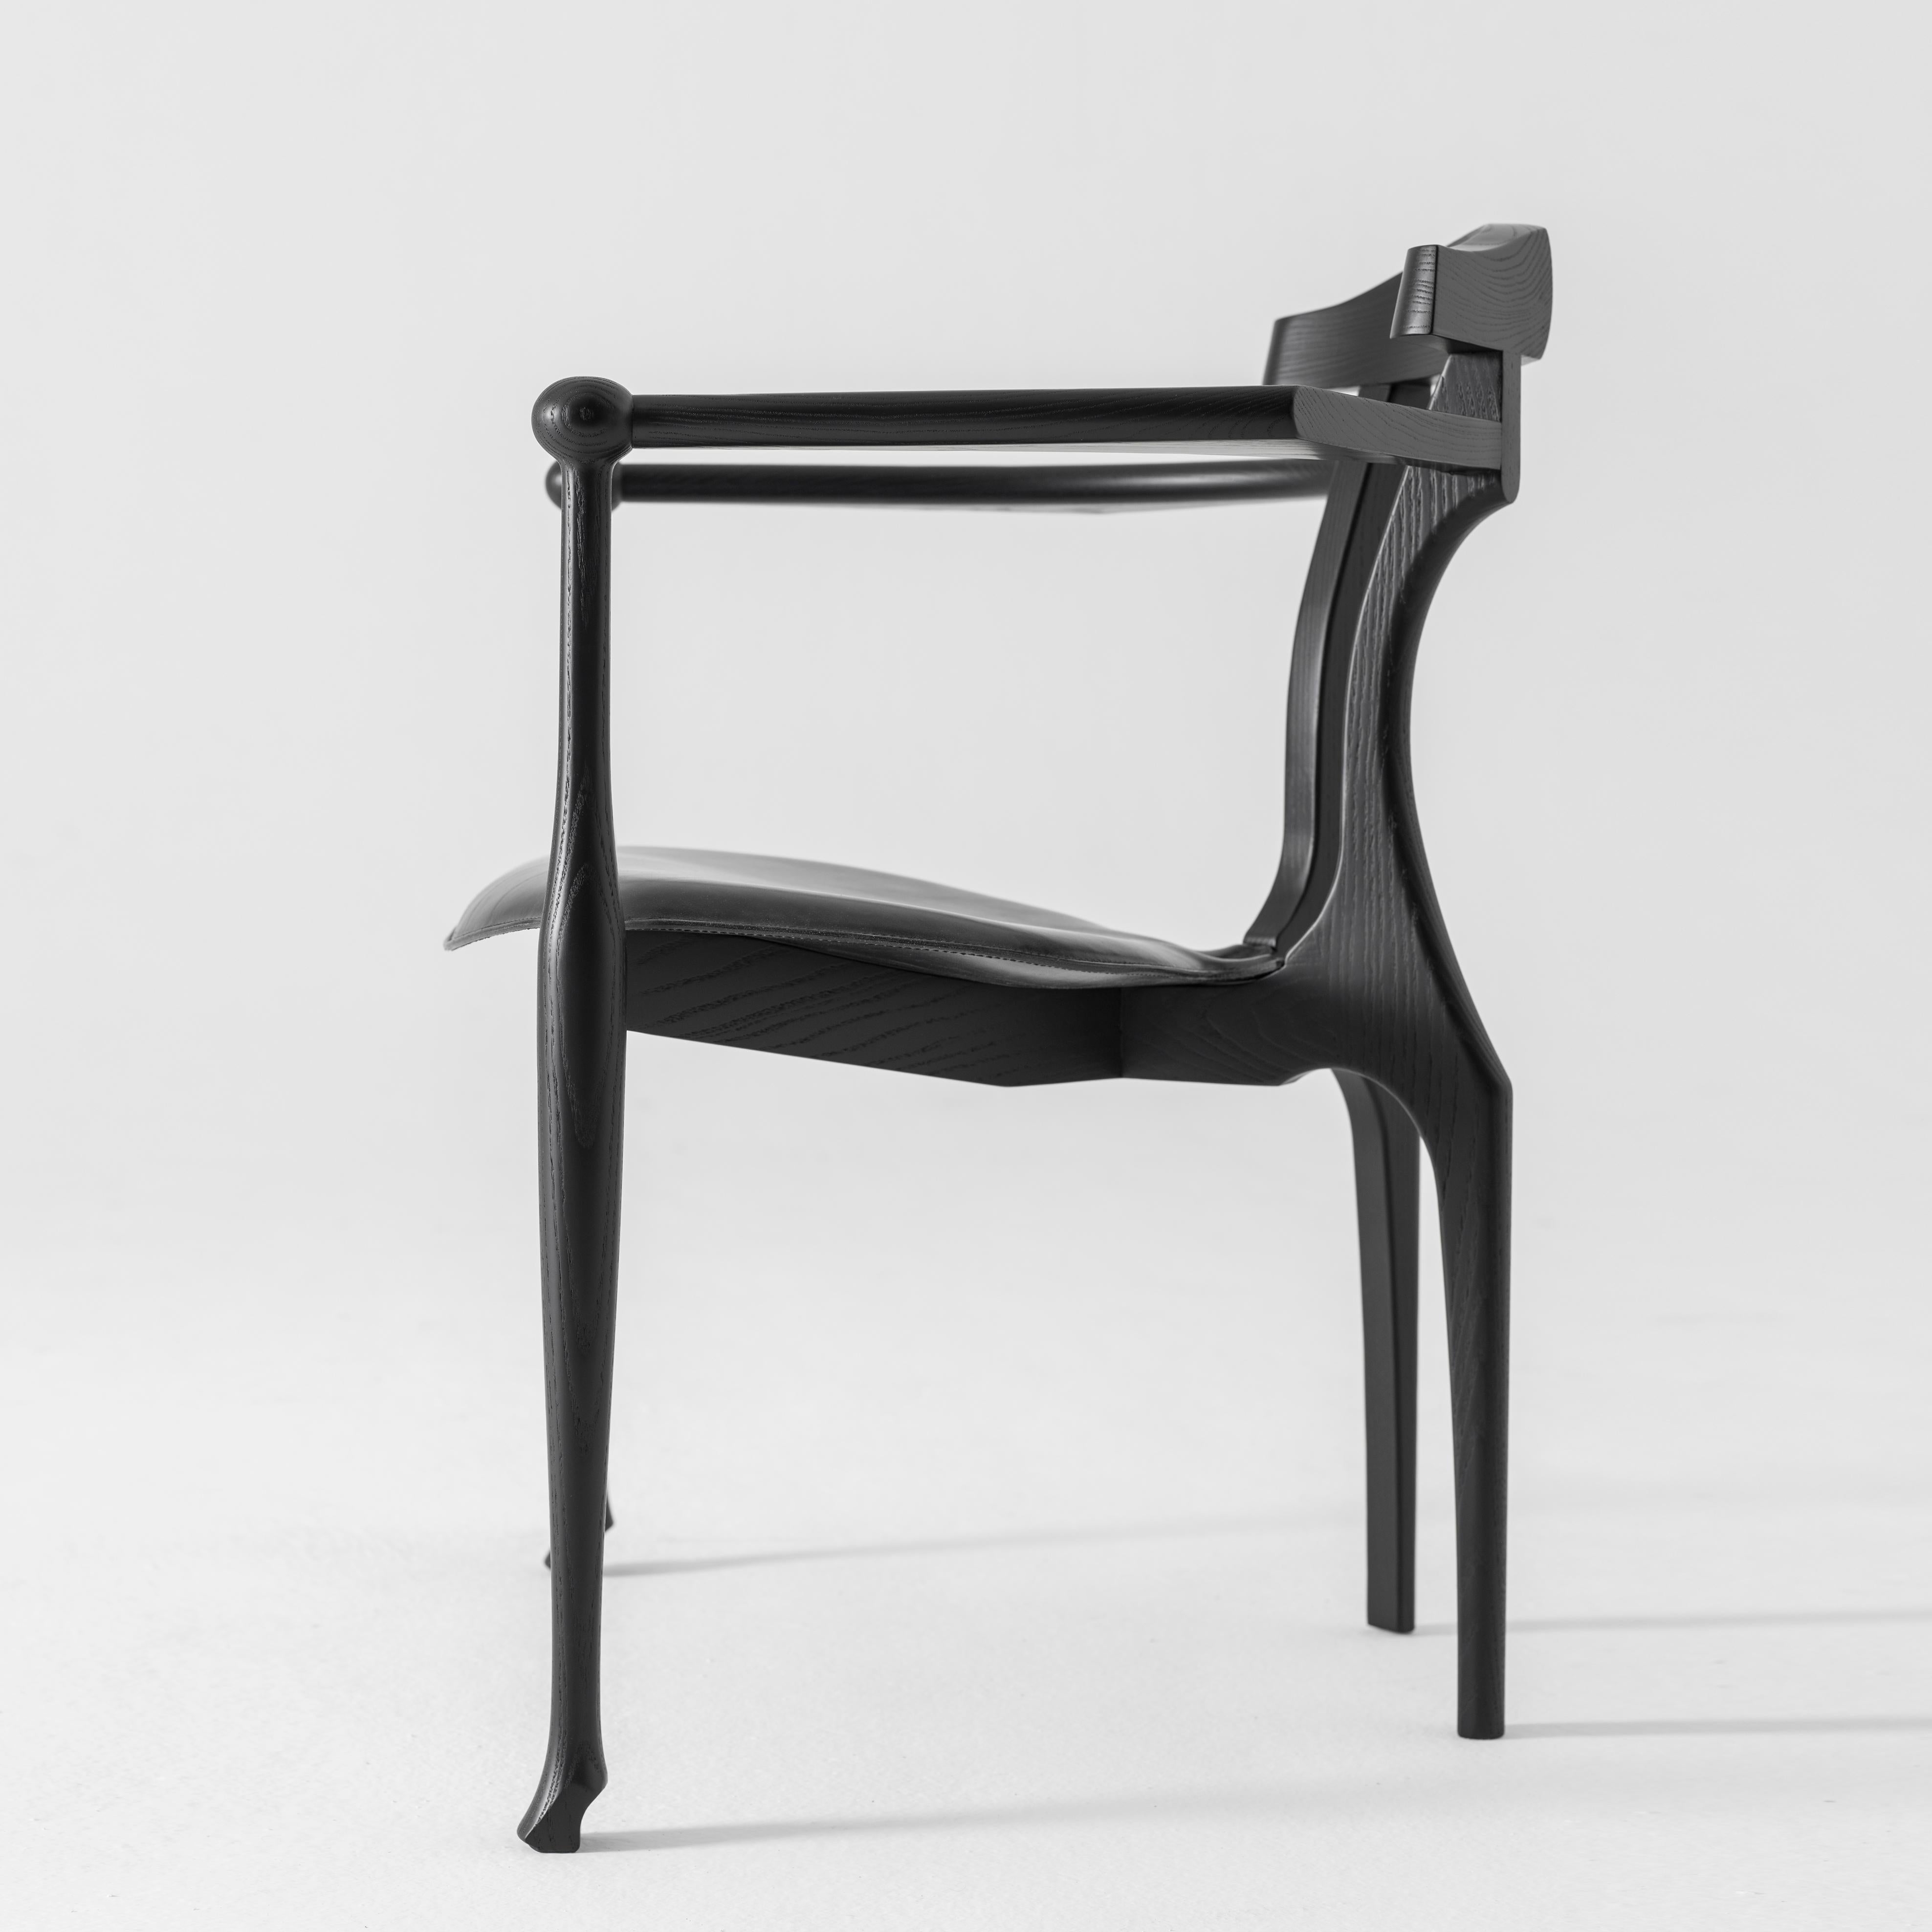 Gaulino easy chair designed by Oscar Tusquets manufactured by BD Barcelona design, circa 2010.

Solid ash lacquered in black with seat in black hide.


Gaulino chair which, designed in 1987, was selected for the Industrial Design Prize and